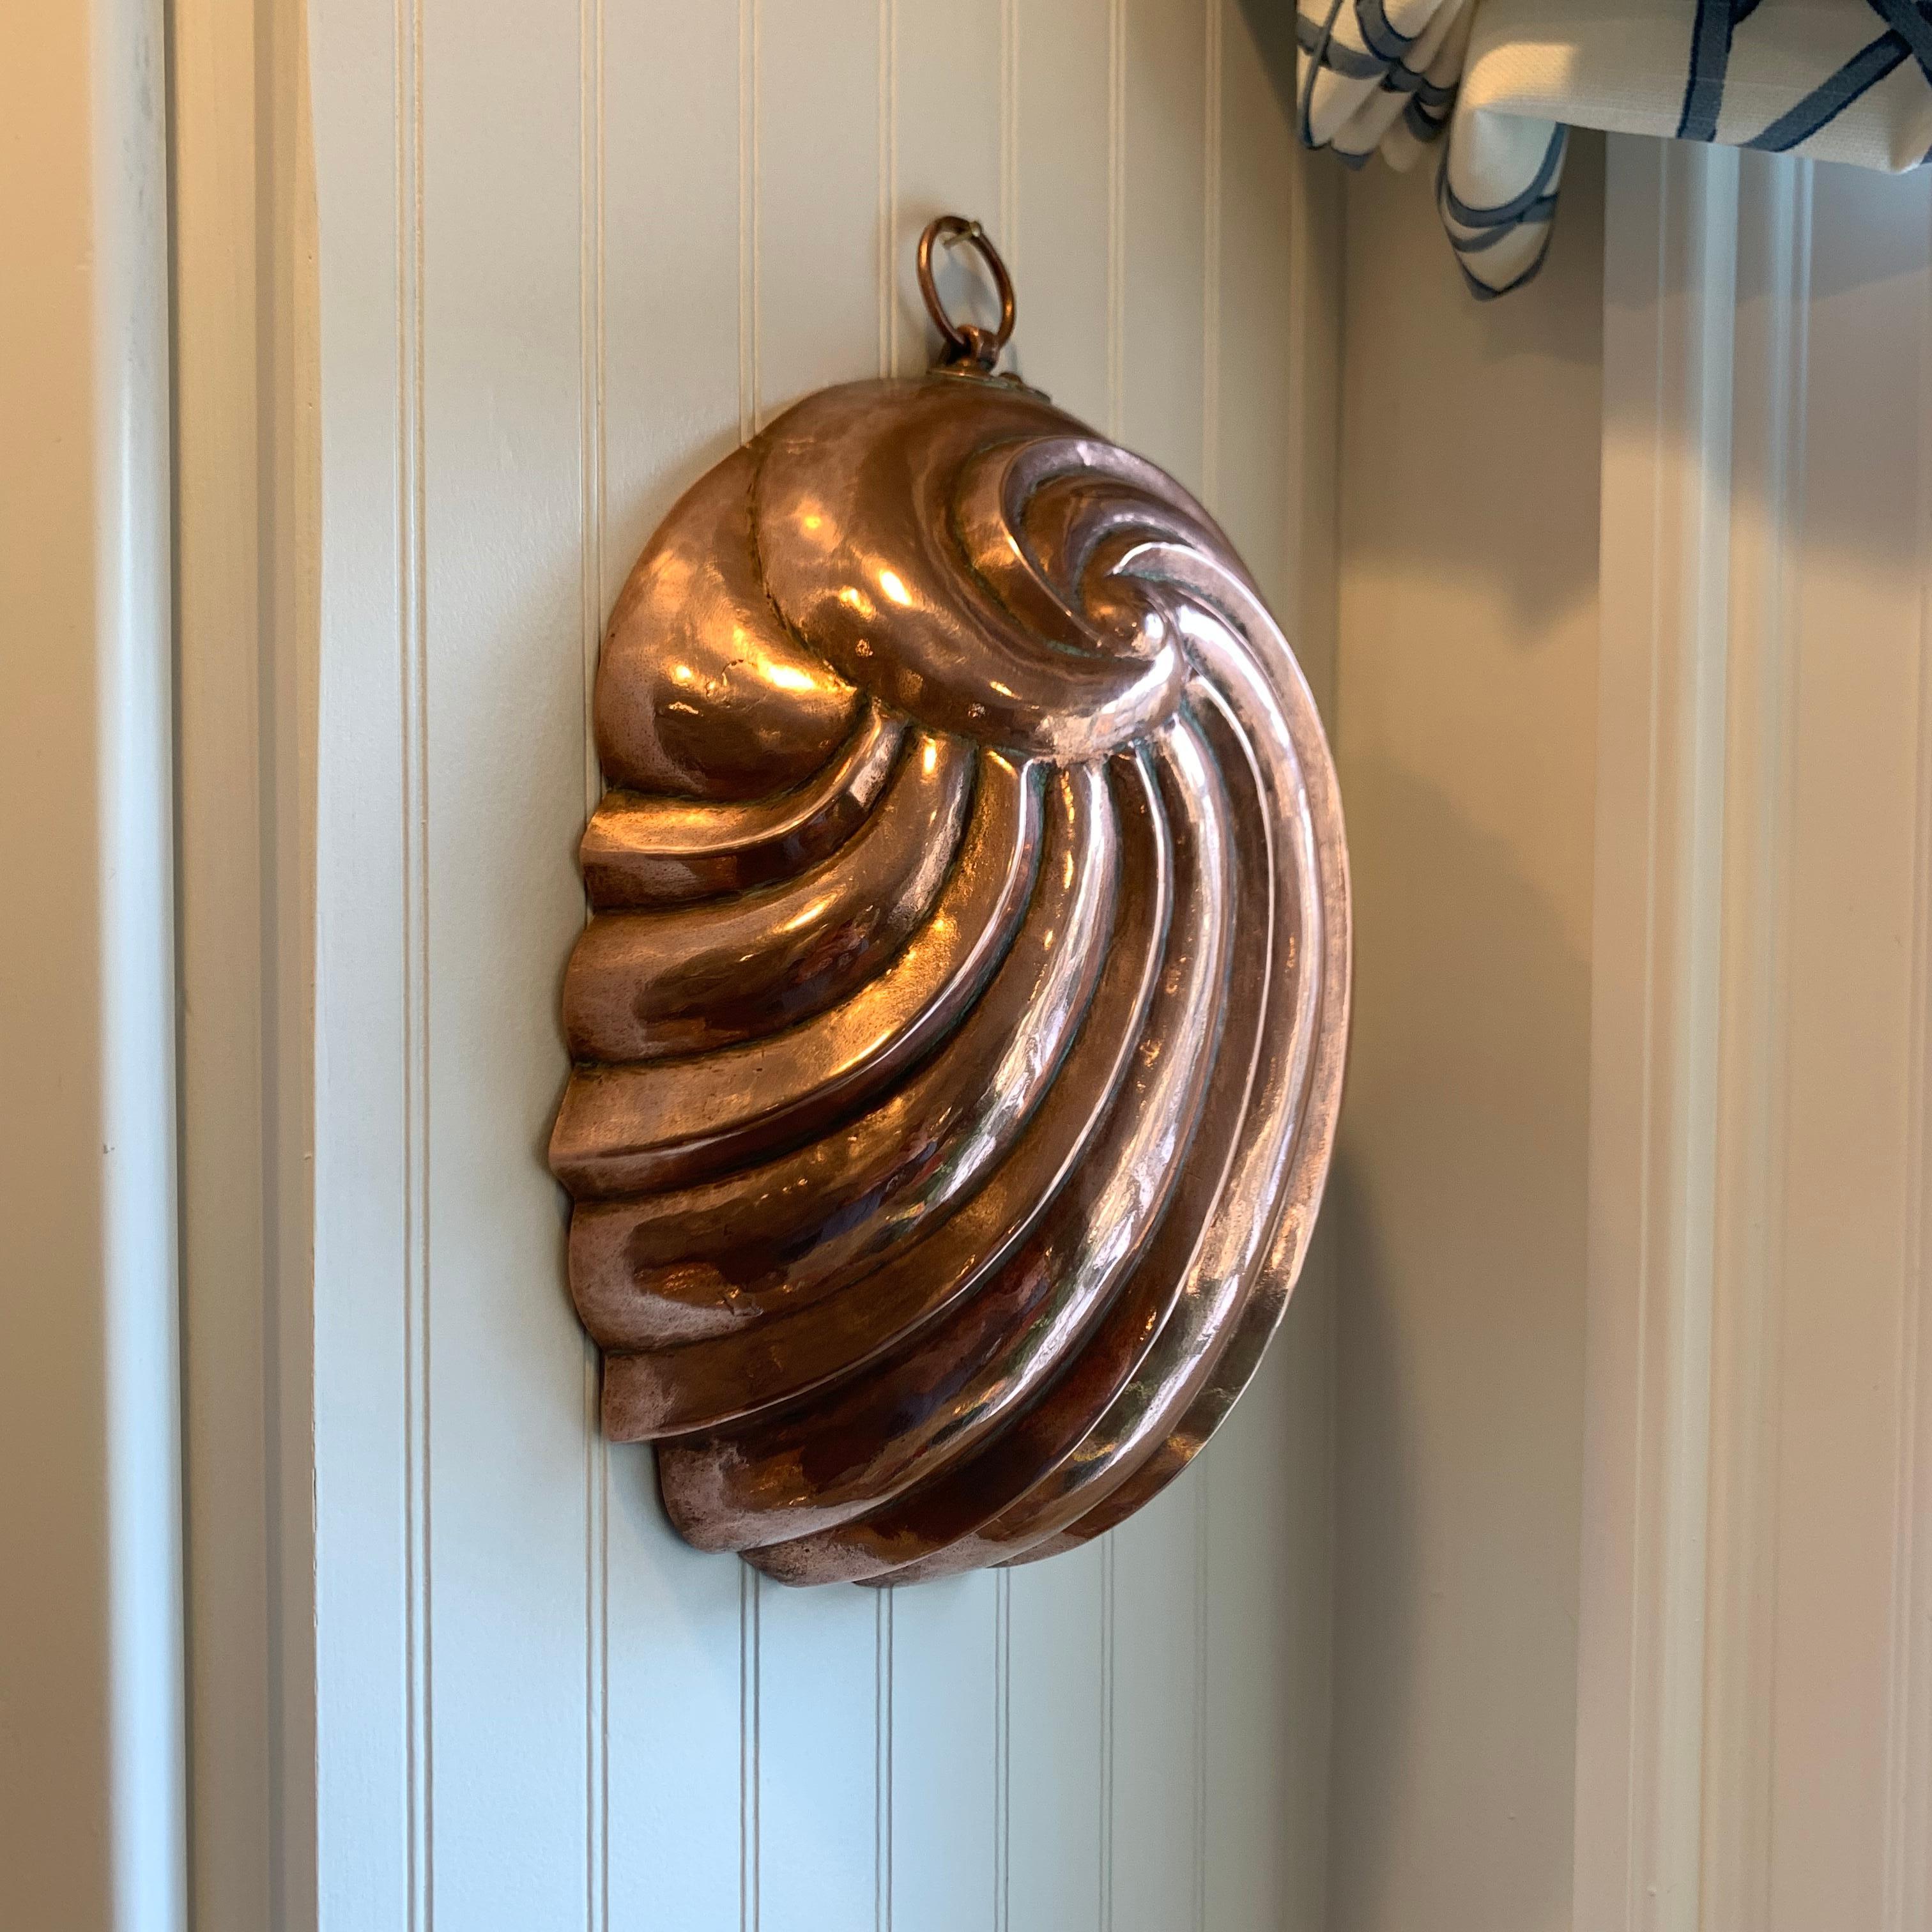 Danish Early 19th Century Copper Form or Dish in the Shape of a Conch 9